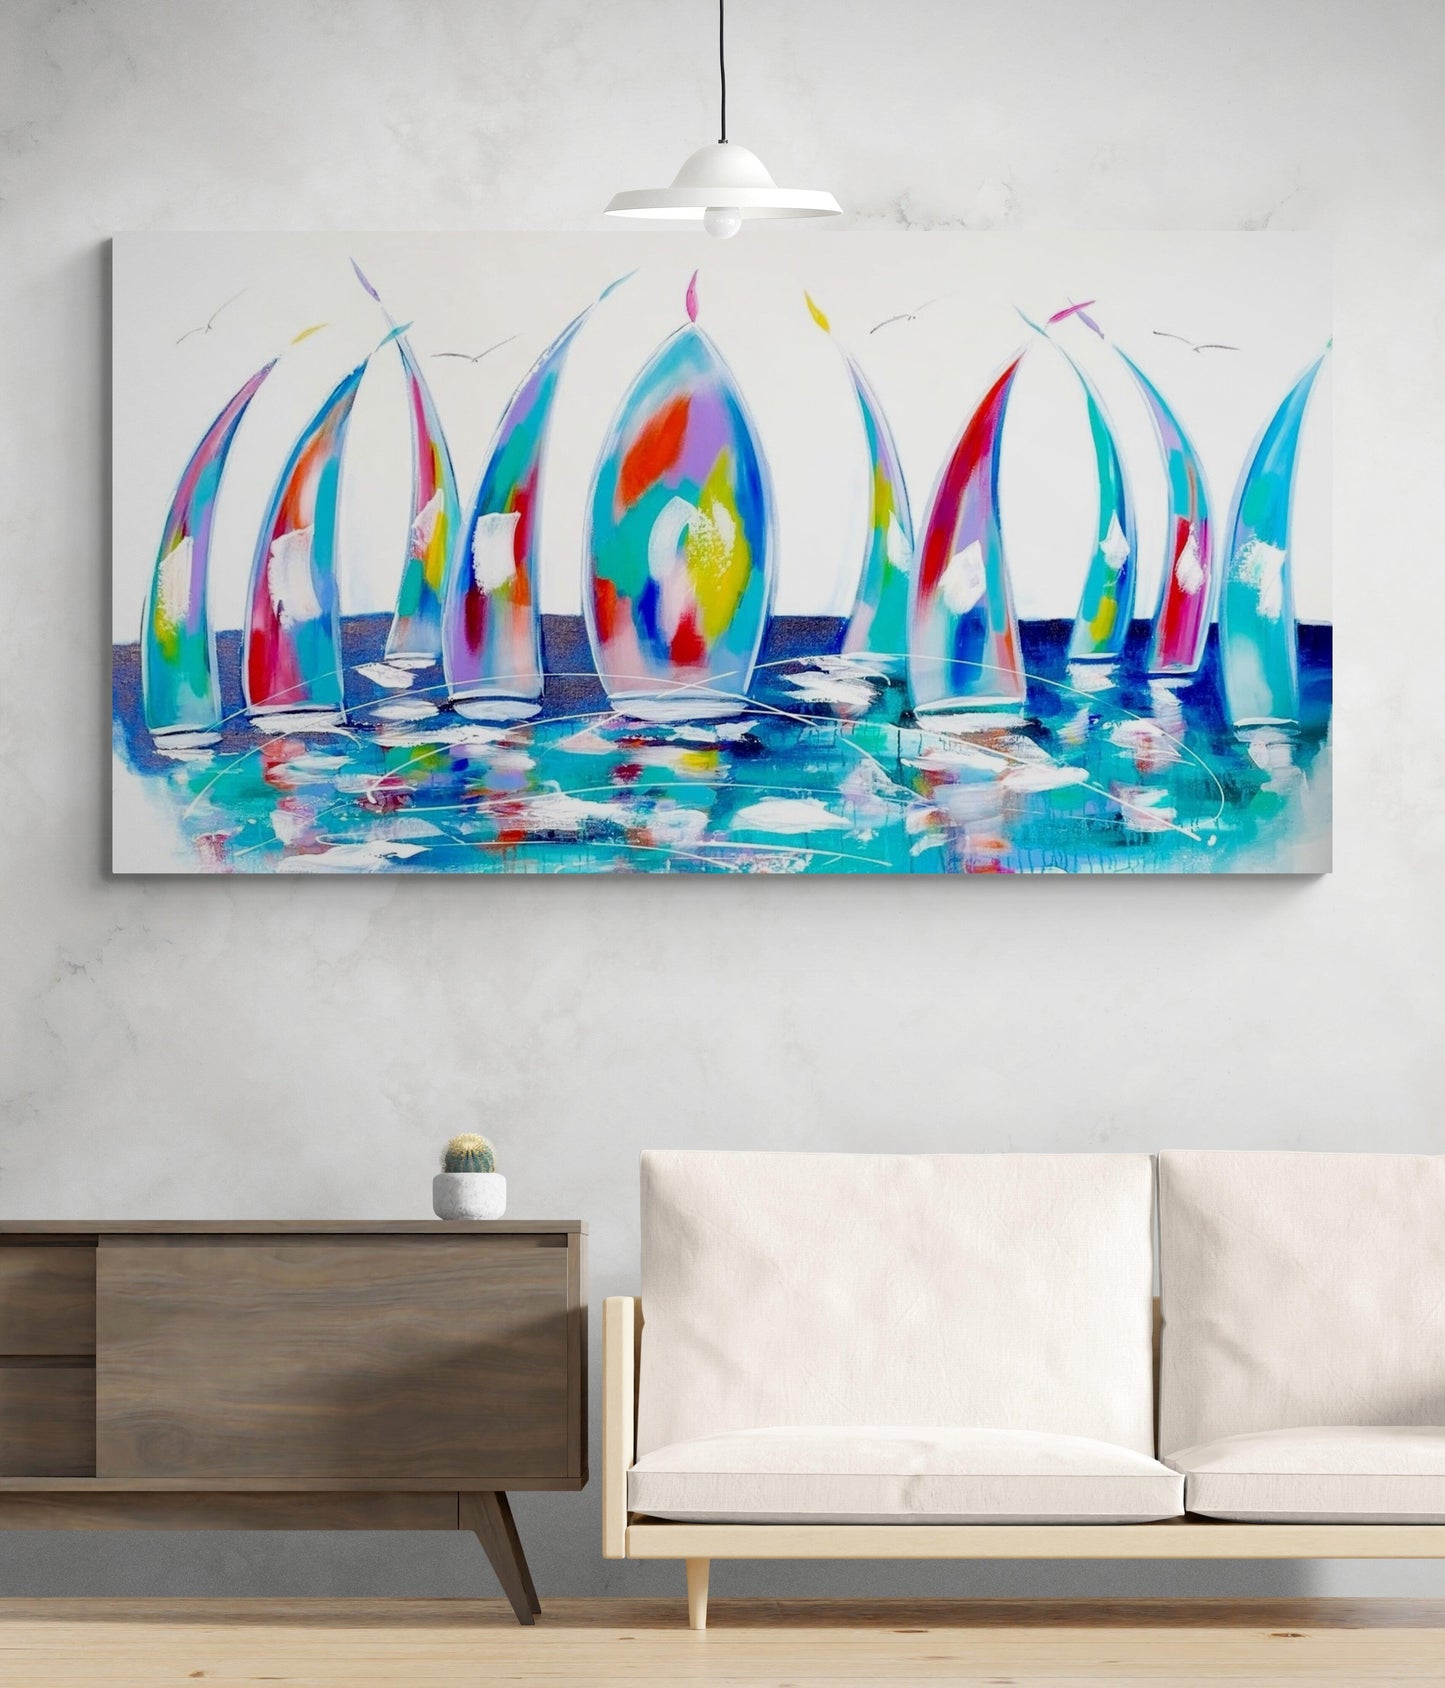 Capture the ocean breezes in the Sails -1.5 x 1m - Original Artwork - Available by Commission